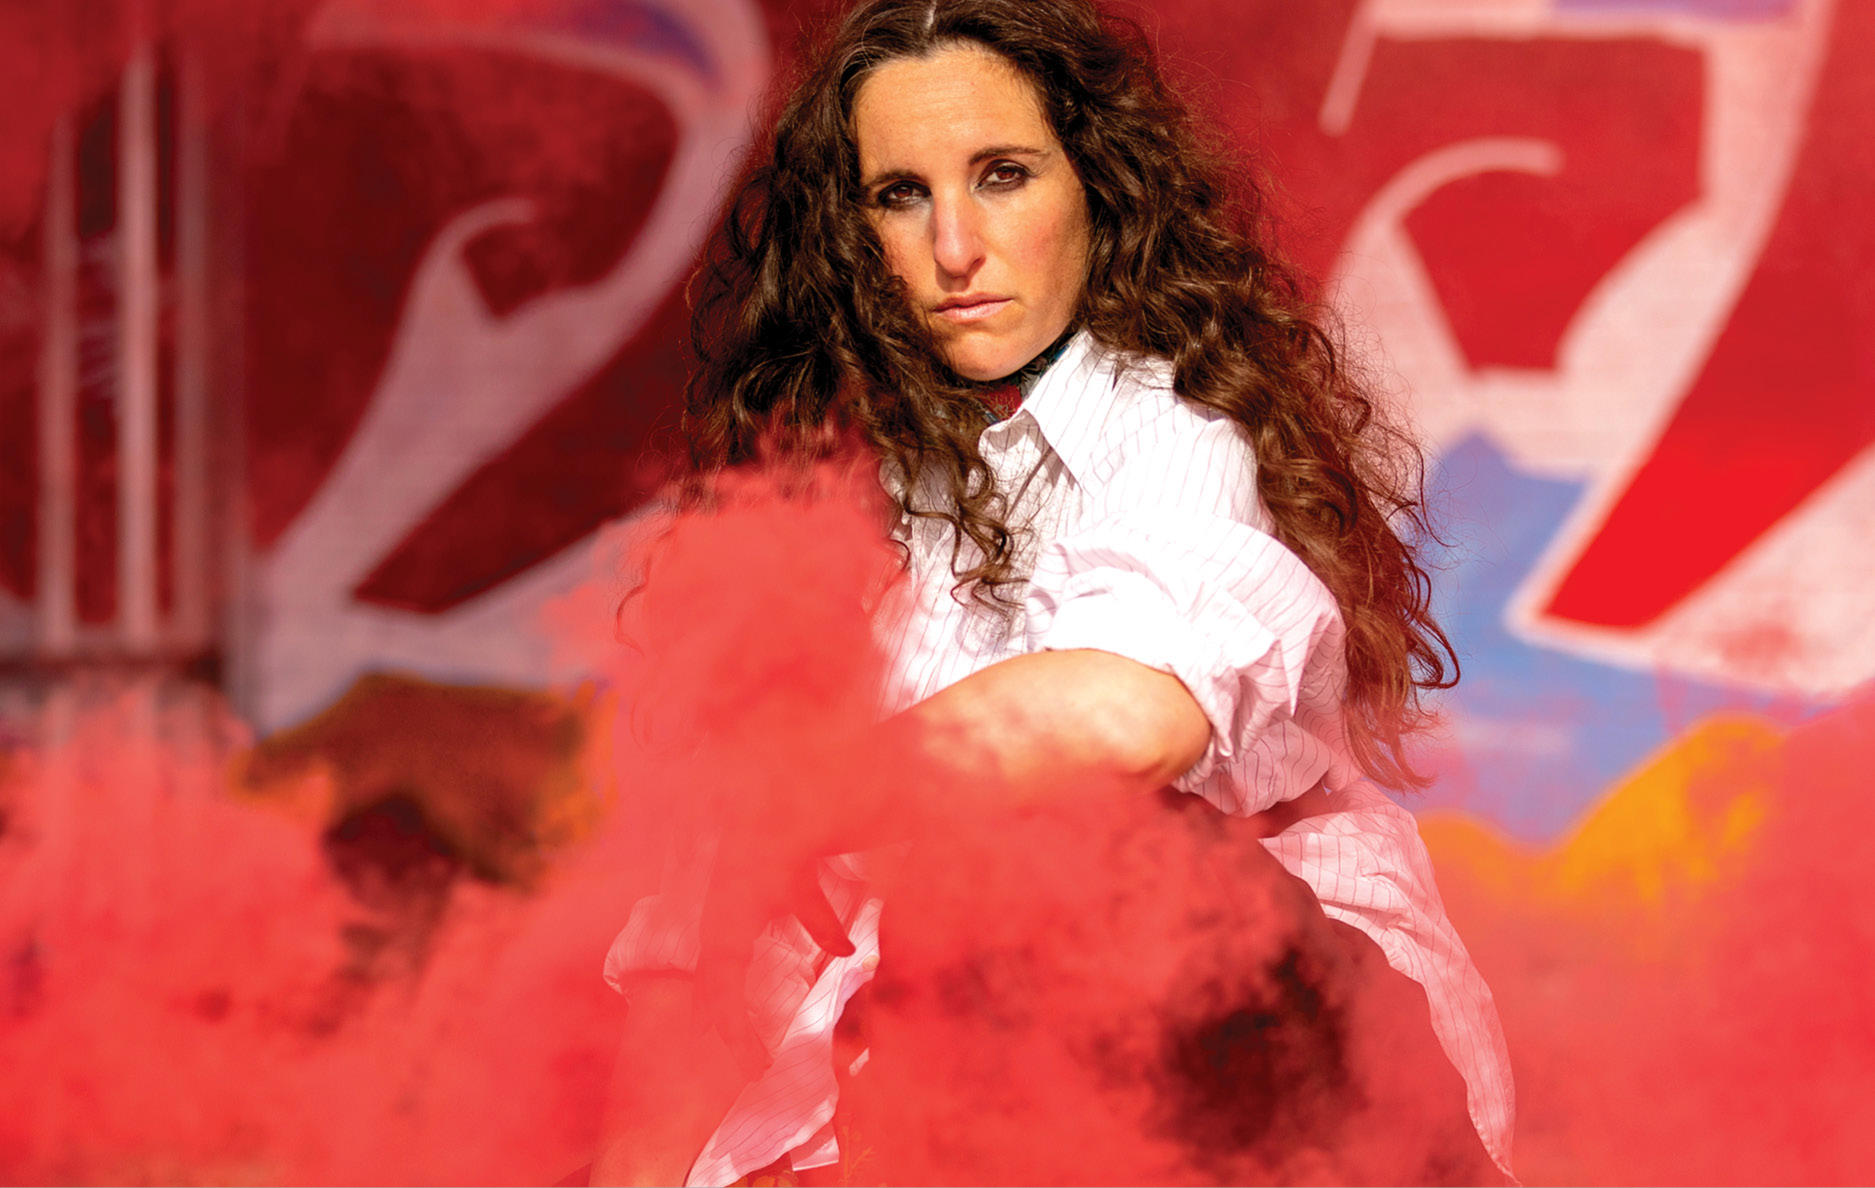 A woman, Carmen, with long, curly hair wearing a white shirt, surrounded by red smoke